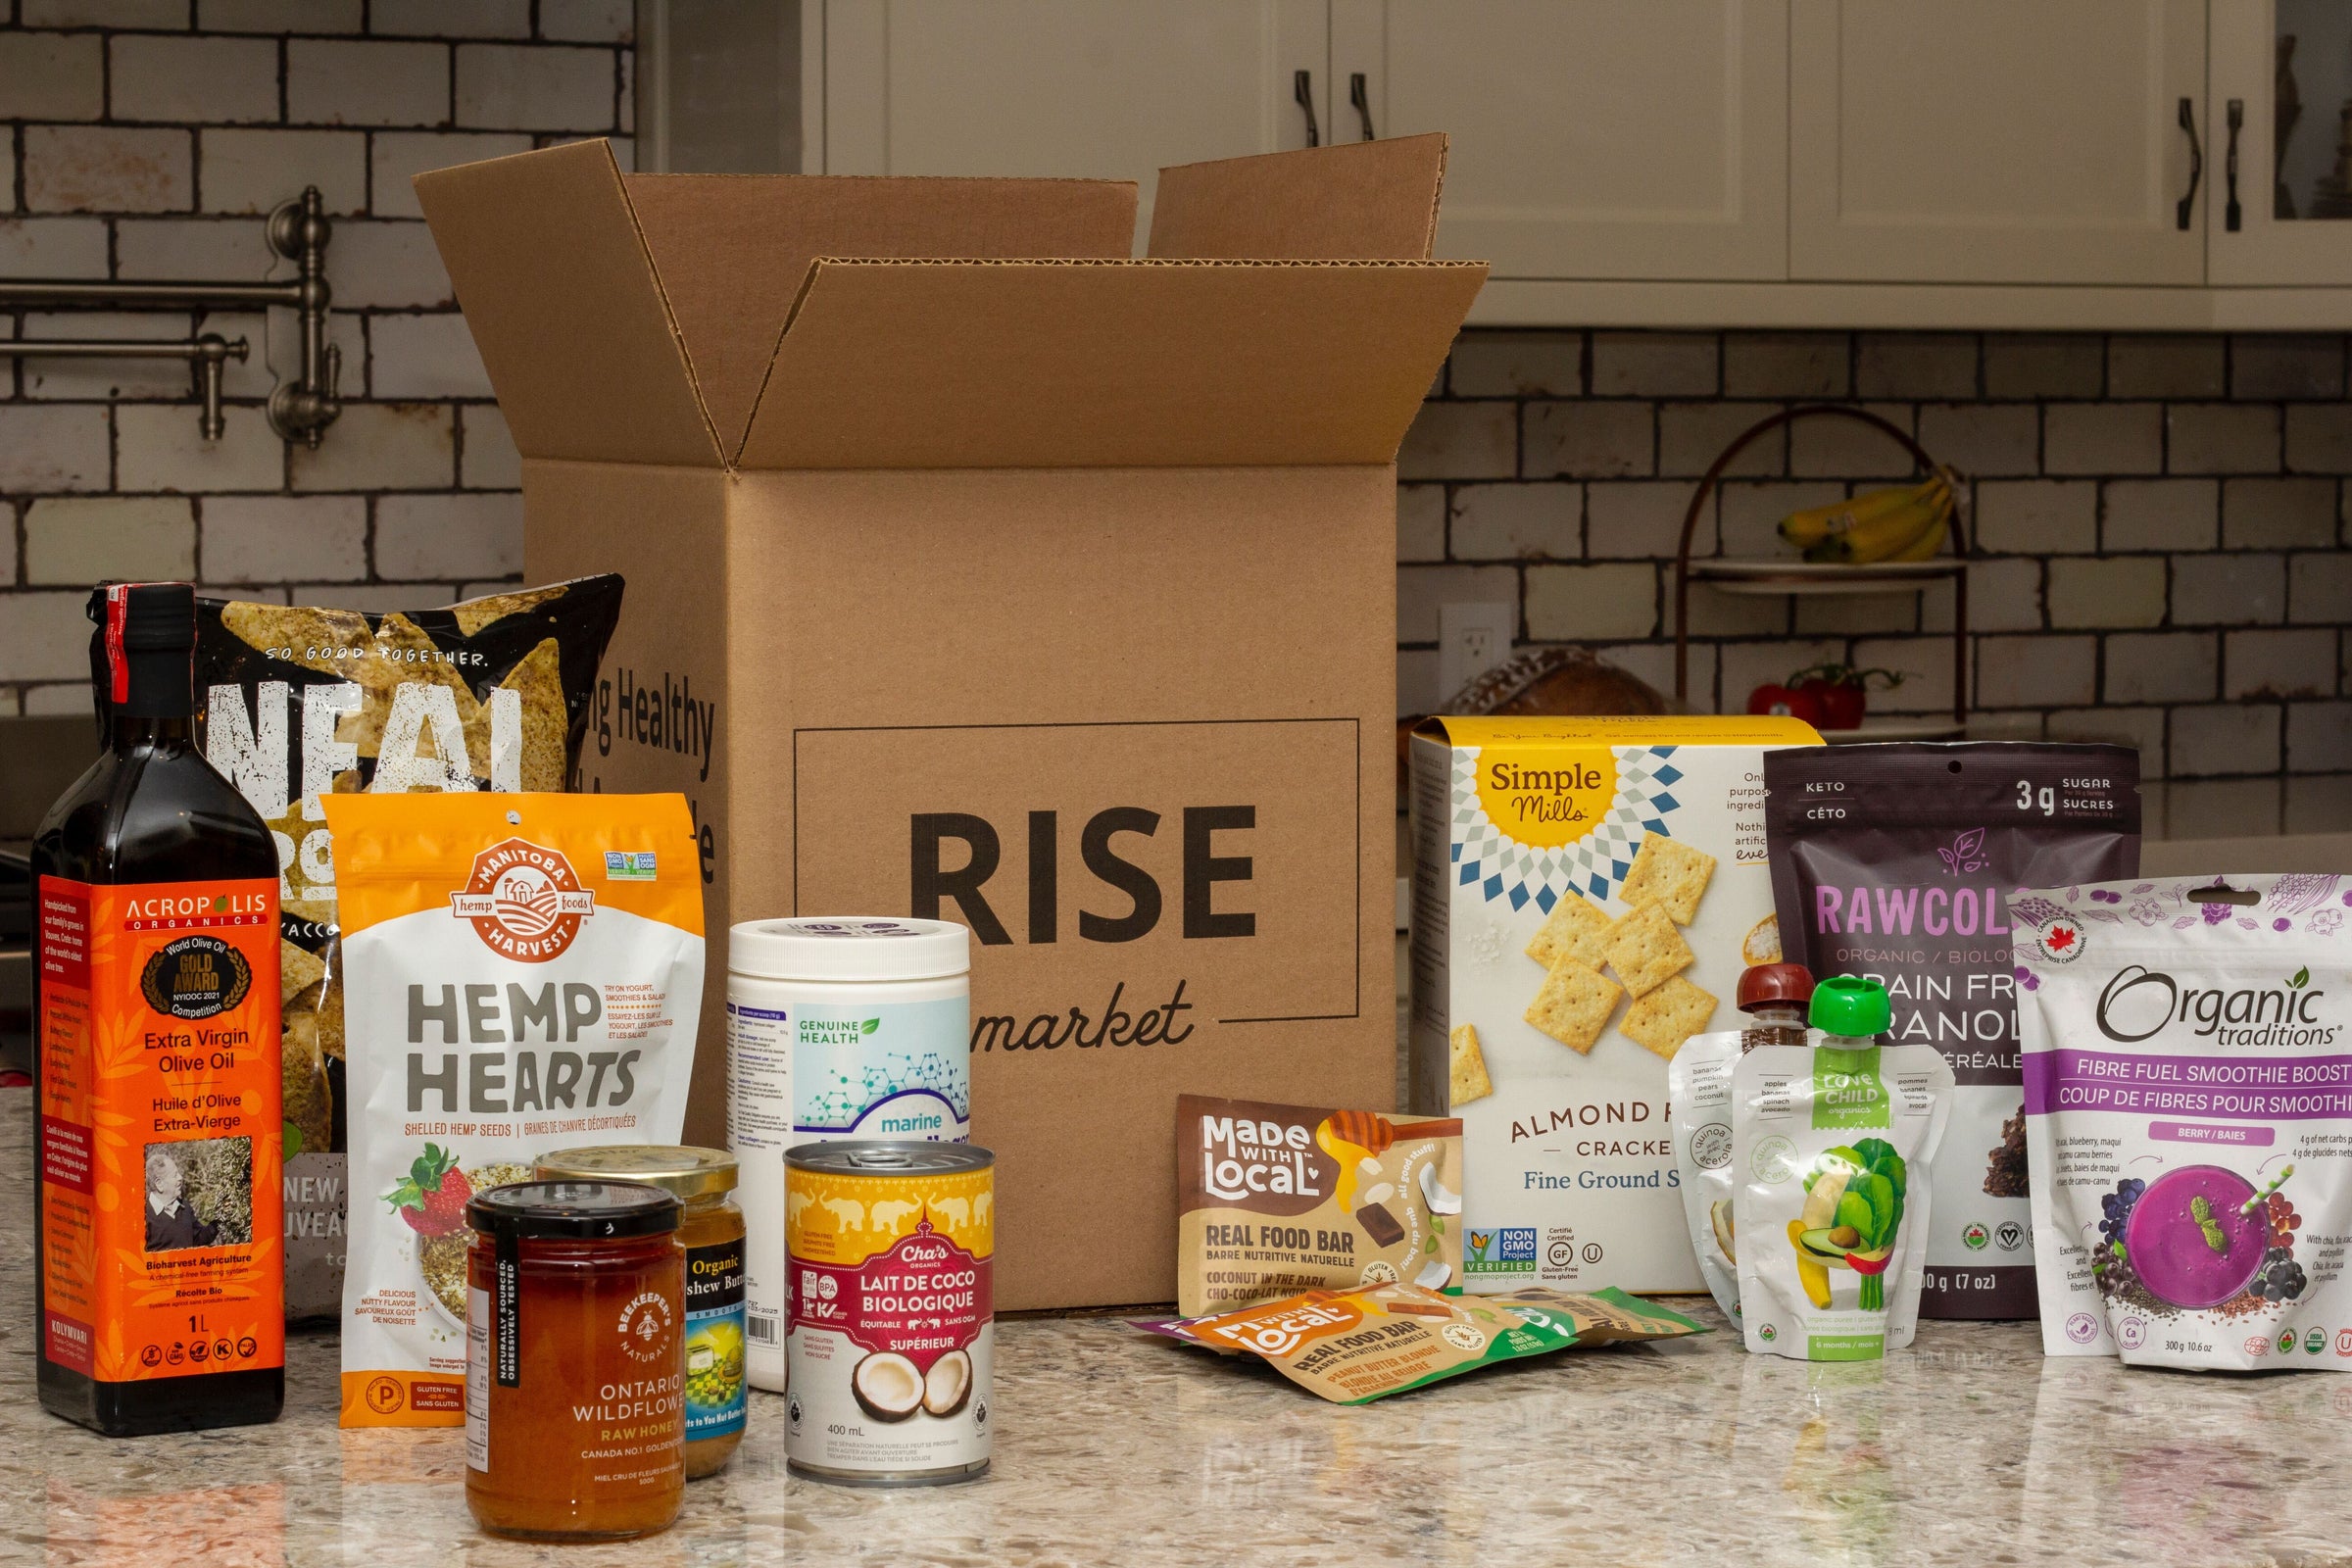 Save on Organic Groceries, delivered. Rise Market carries 2000+ products like Aartisanan ilive POil, Simple Mills Almond Flour crackers, Manitoba Harvest hemp hearts, Made with Local Real Food bars, and many more. 